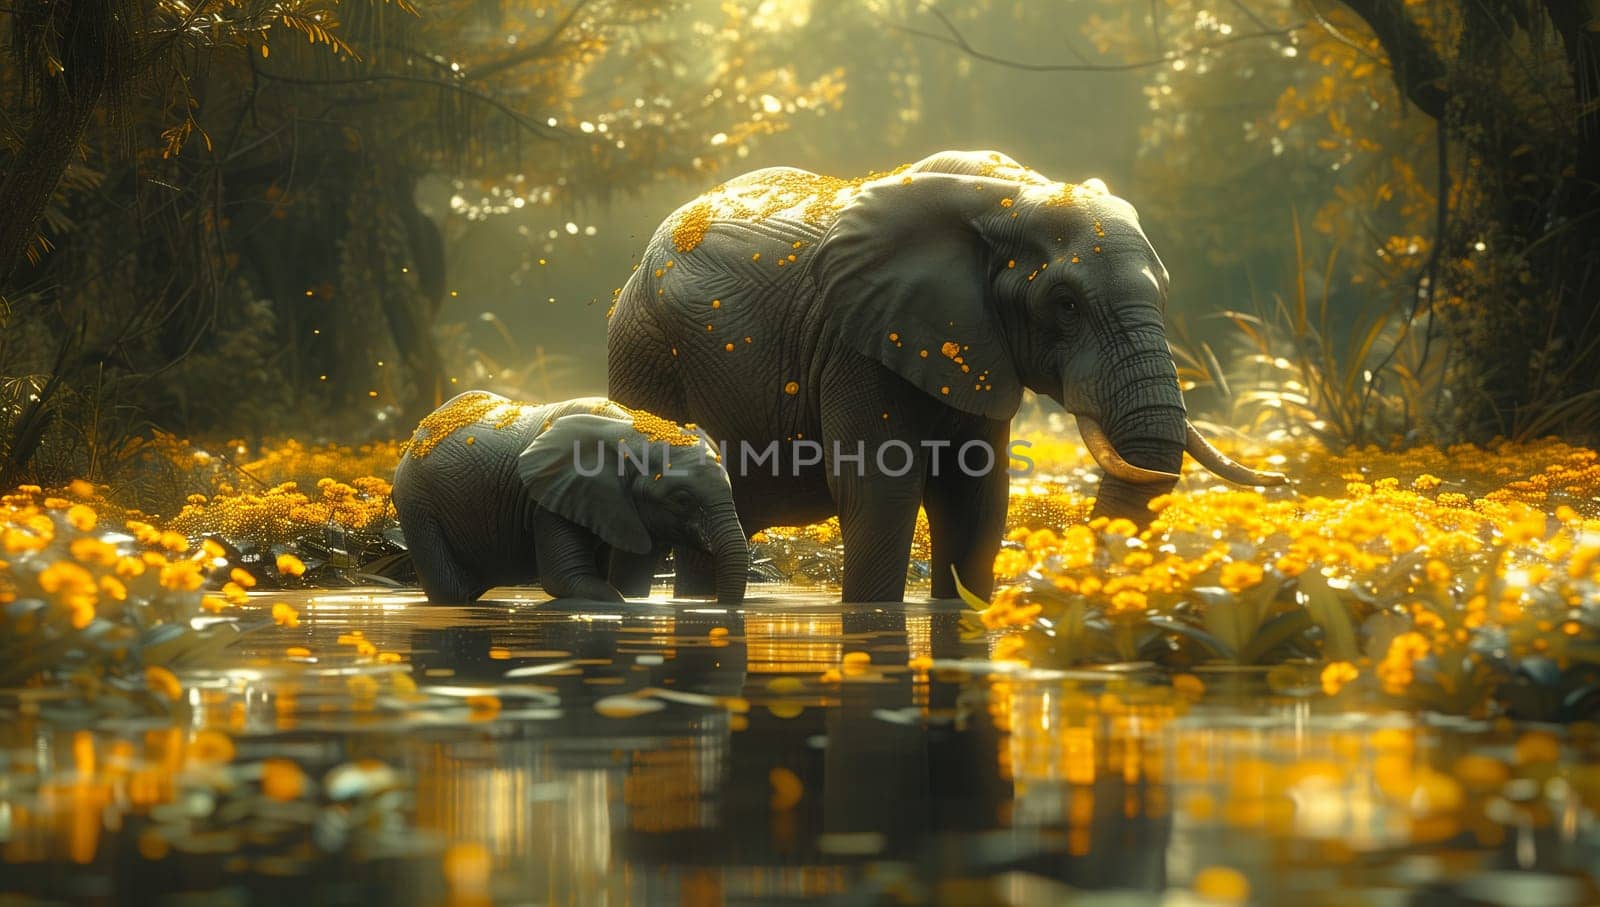 Two elephants, a mother, and her baby, can be seen standing in the refreshing water of their ecoregion, surrounded by lush green plants and towering trees